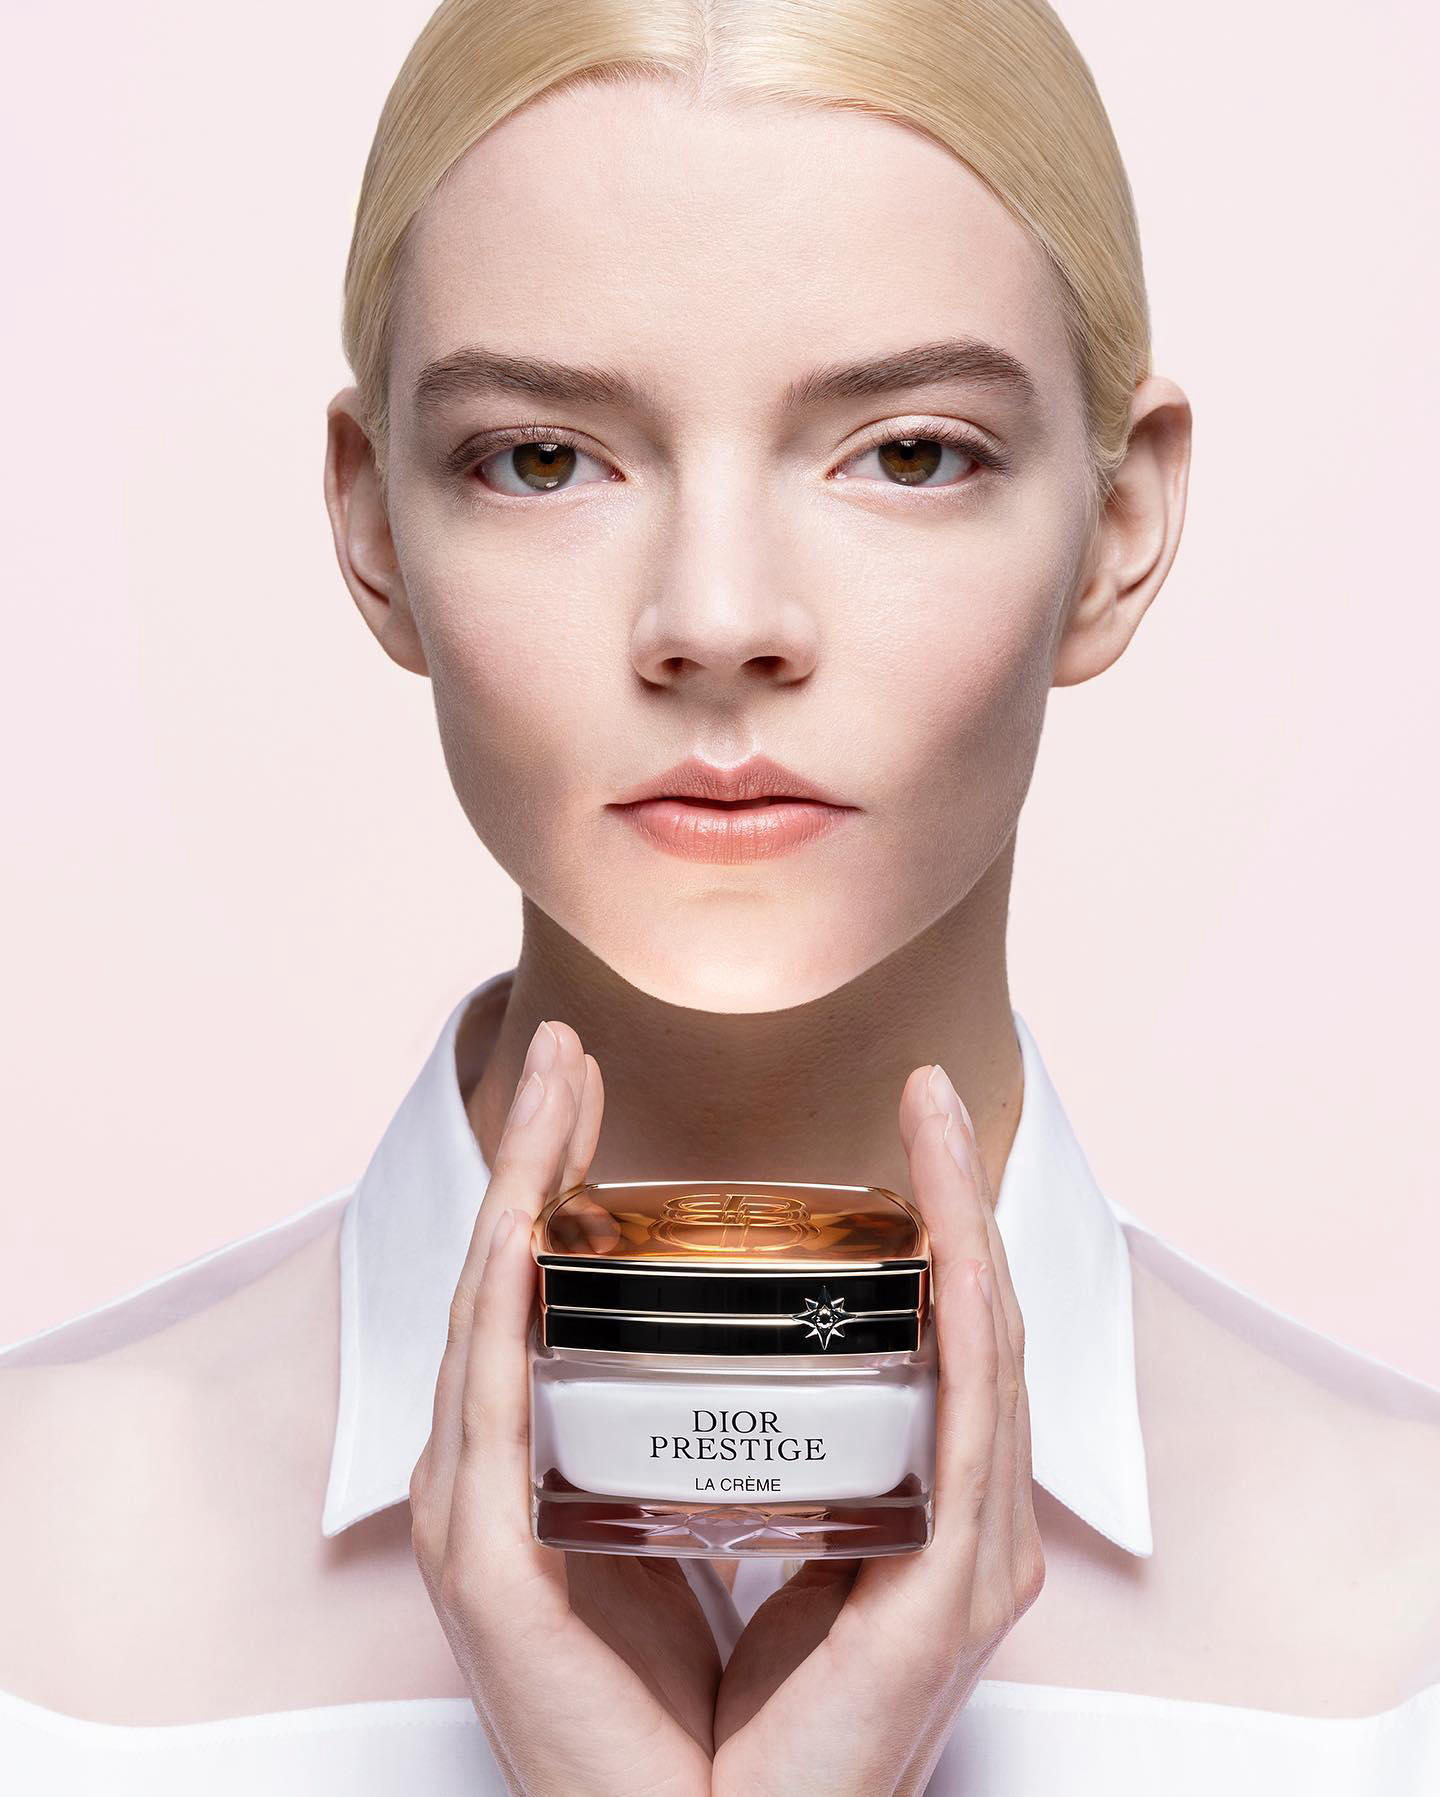 Dior Beauty Official - #anyataylorjoy holds more than a cream